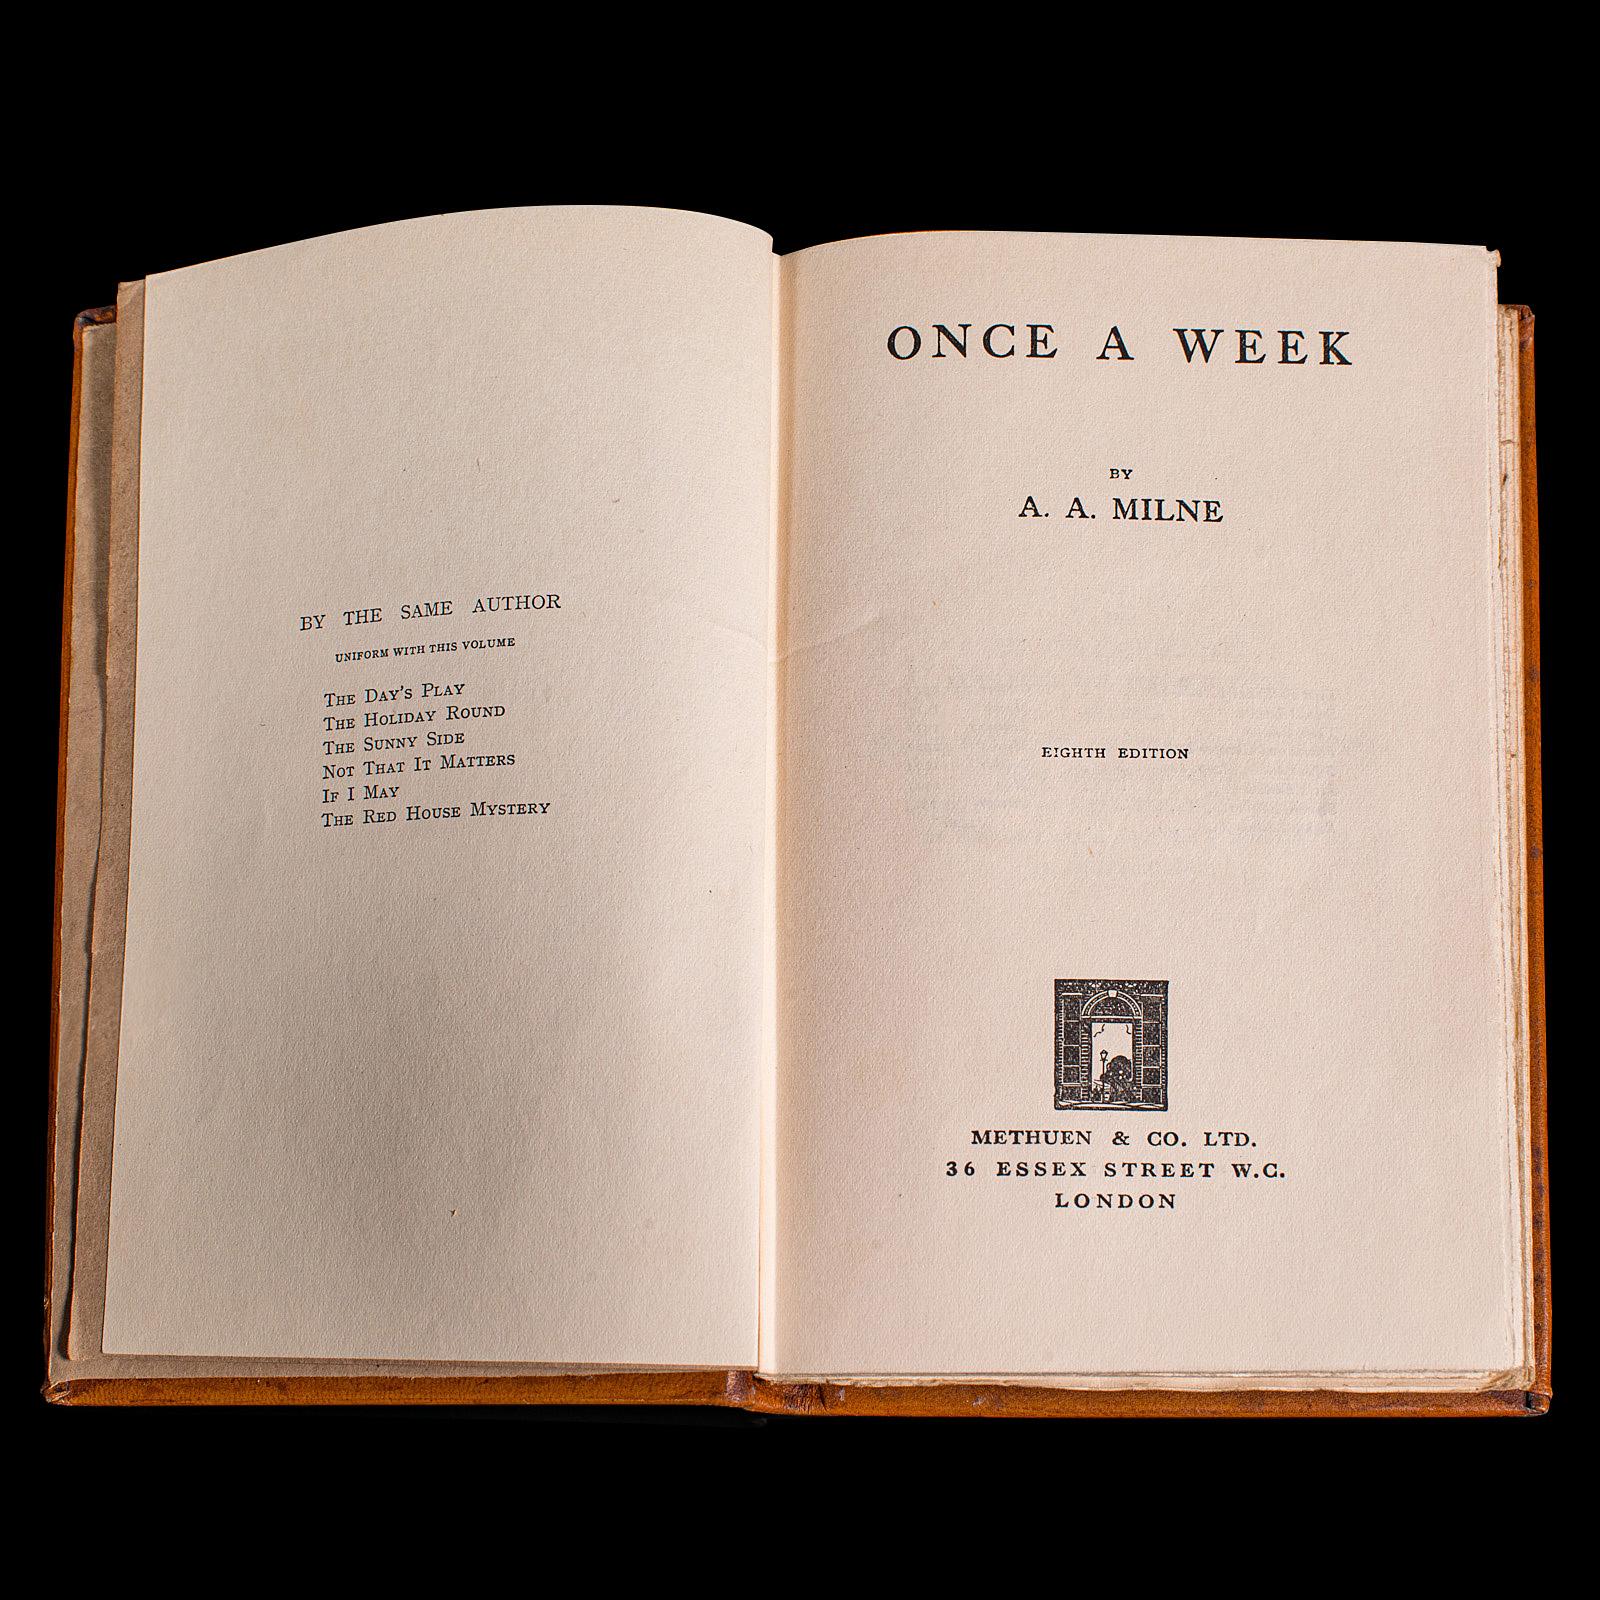 British Vintage Book, Once A Week, AA Milne, English, Morocco Bound, Short Stories, 1926 For Sale